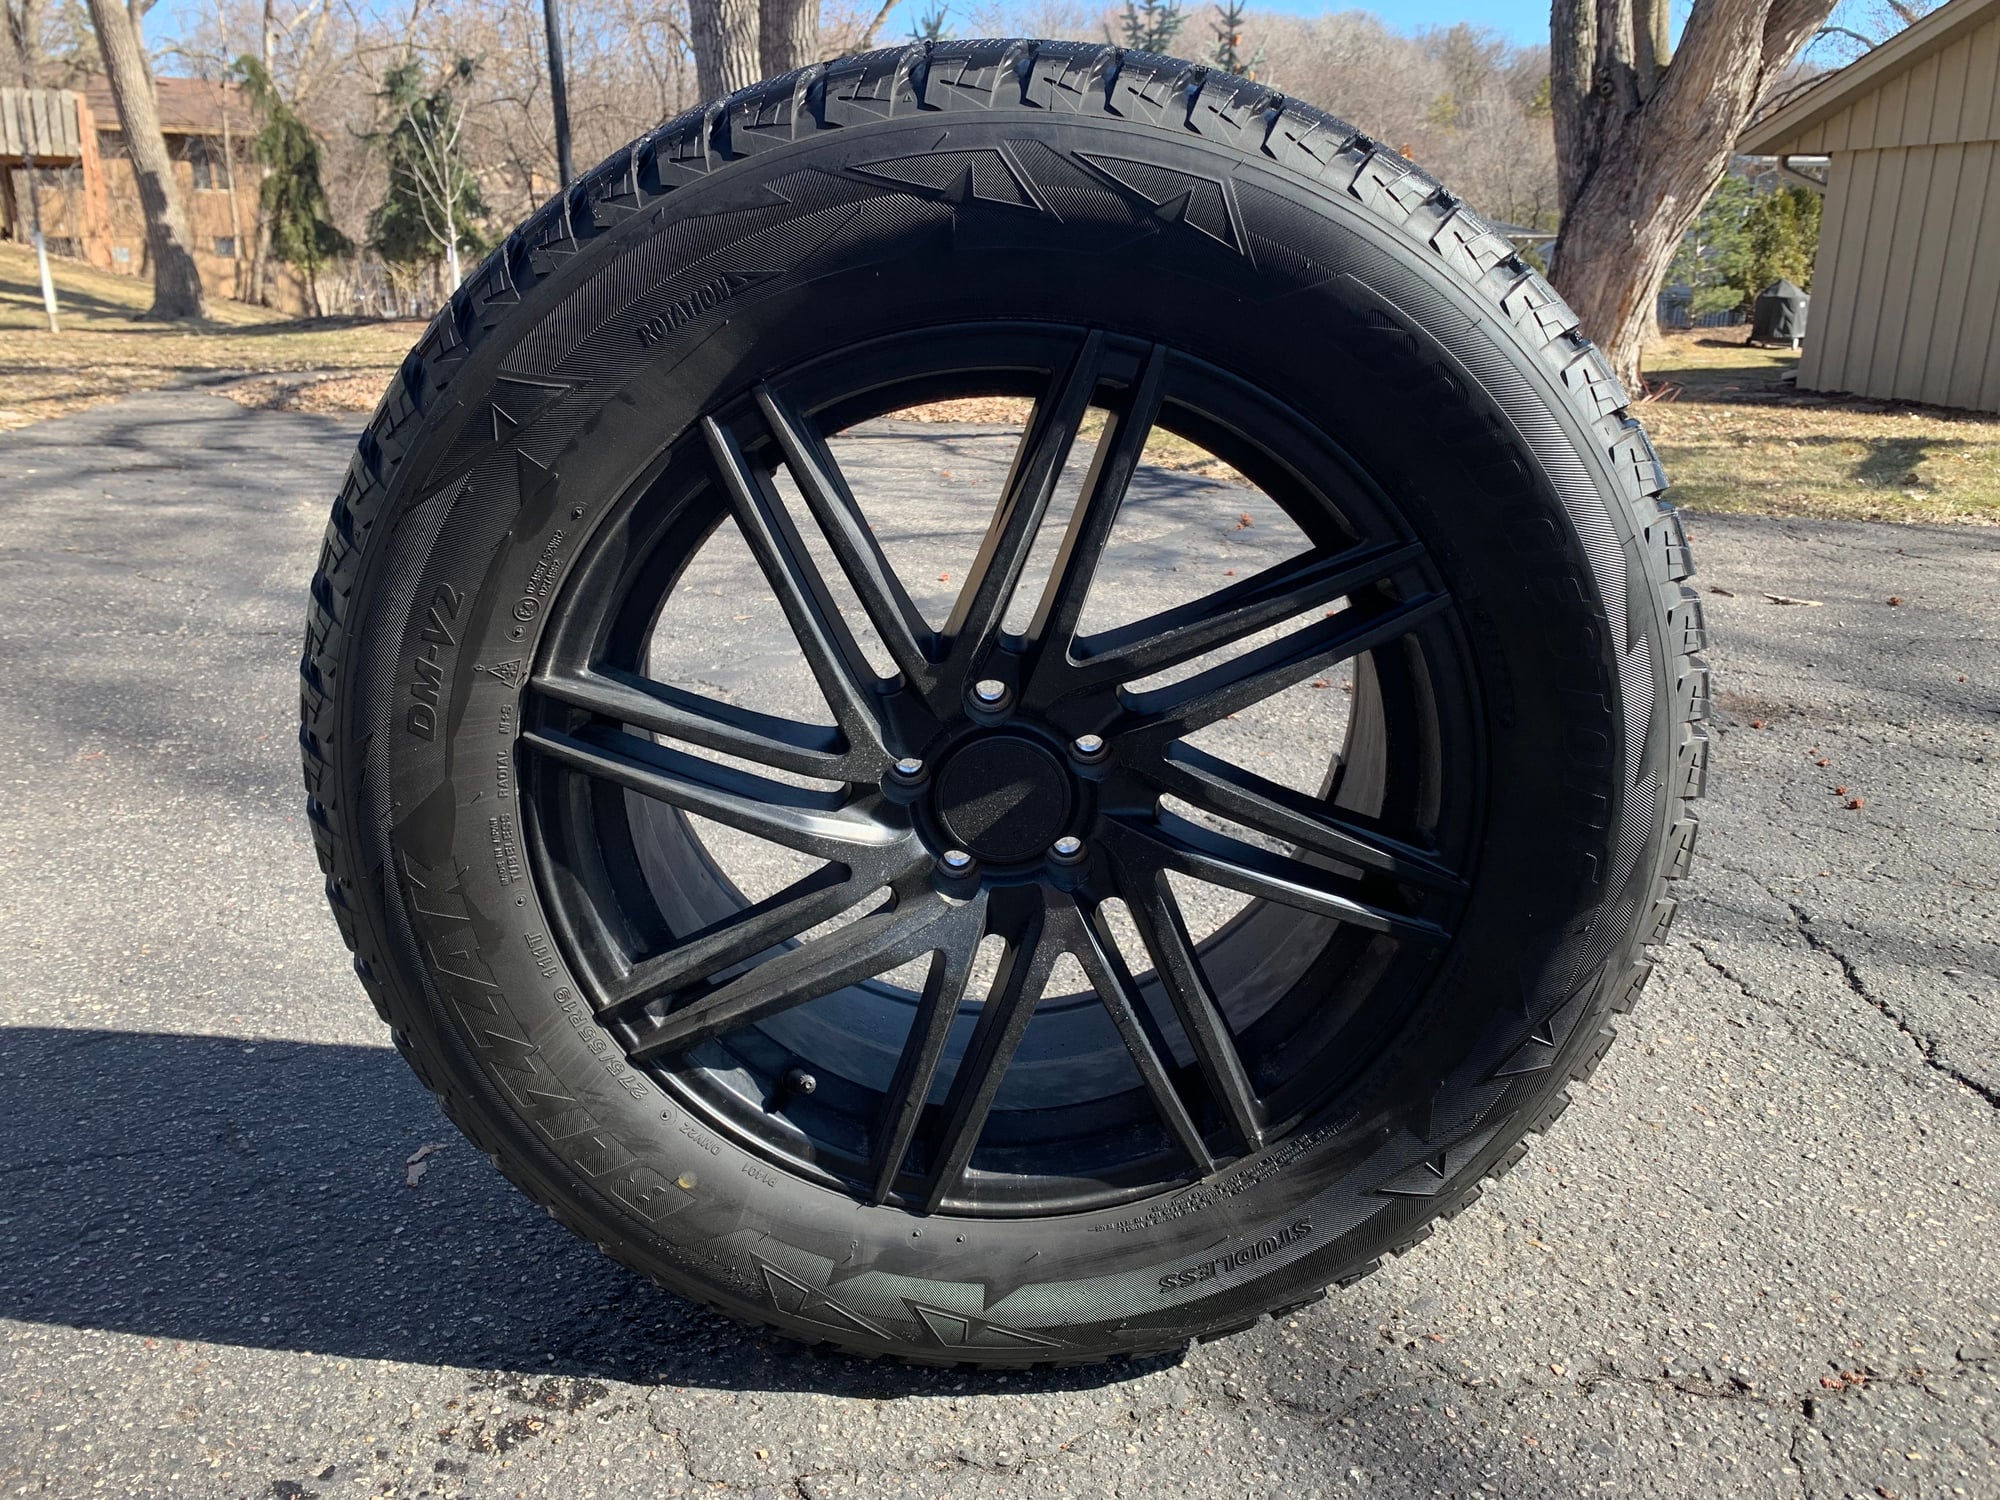 Wheels and Tires/Axles - FS: Winter tire and wheel combo - Used - 2010 to 2022 Mercedes-Benz GL450 - Minneapolis, MN 55439, United States